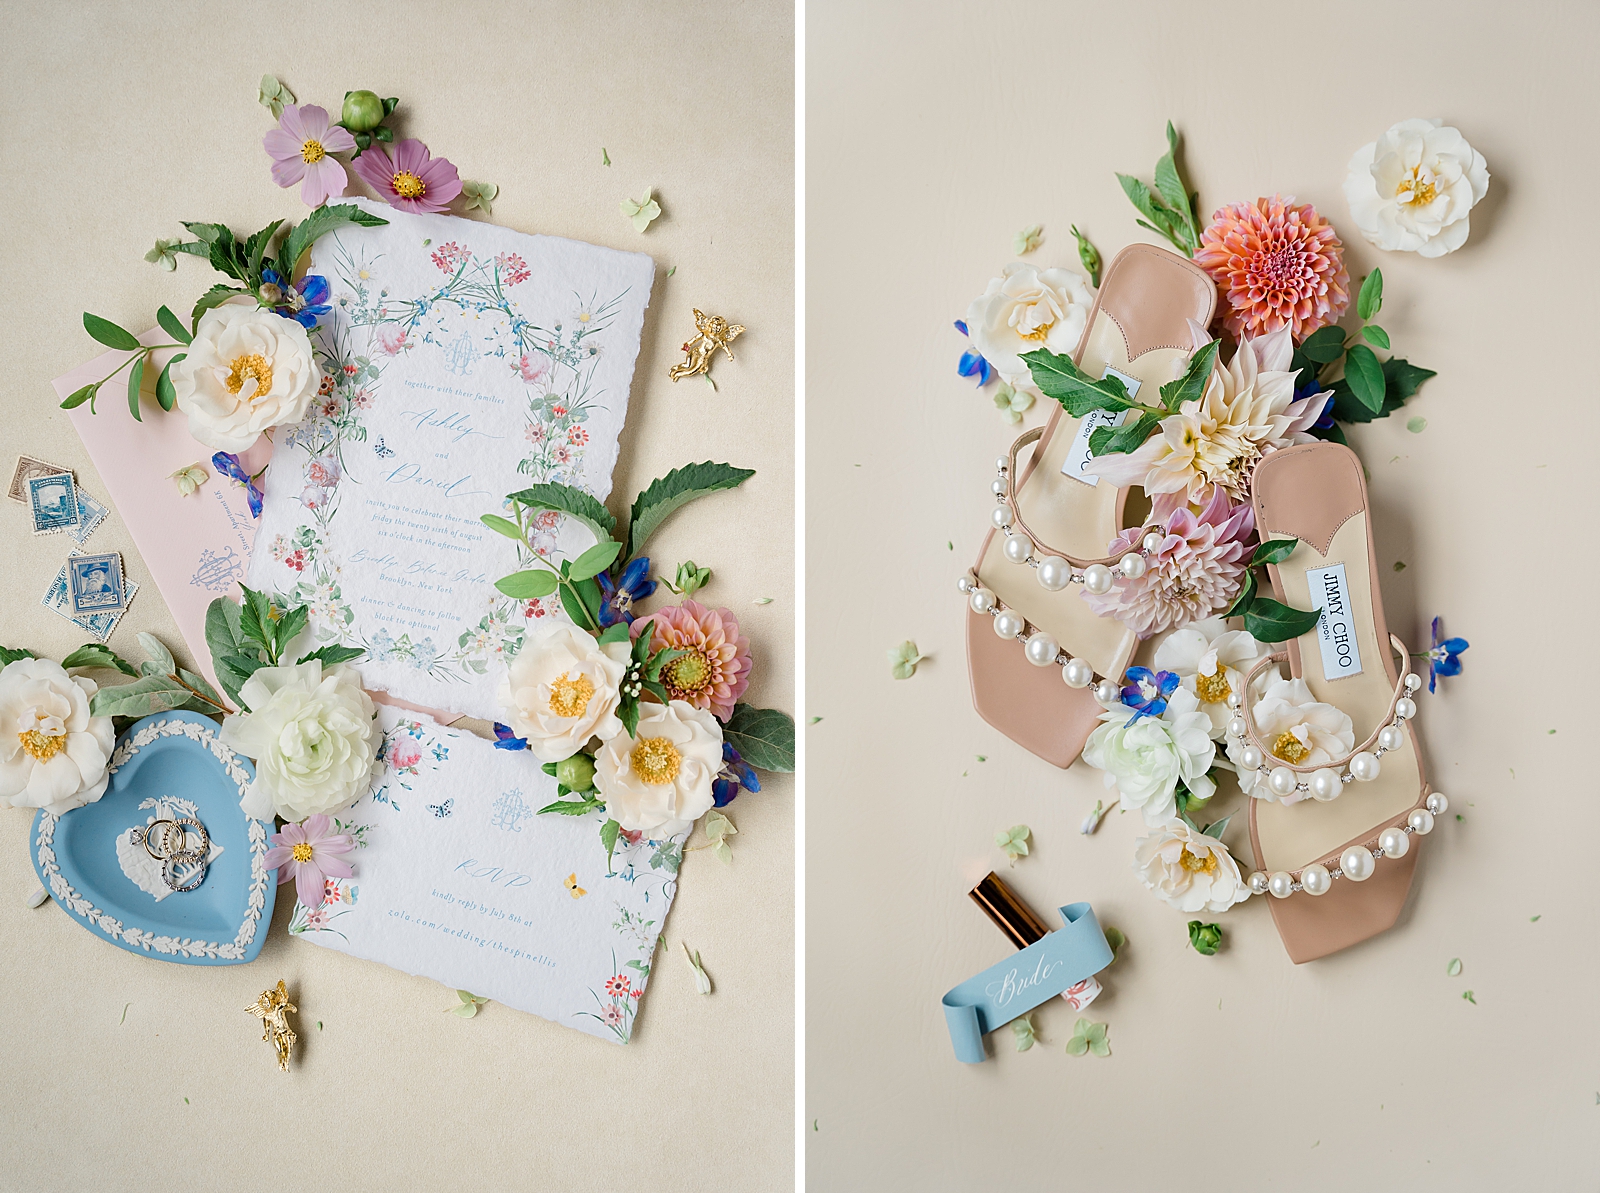 Left photo: Wedding details including invitations, rings, and flowers.
Right photo: Shot of the Bride's Jimmy Choo heels surrounded by flowers.